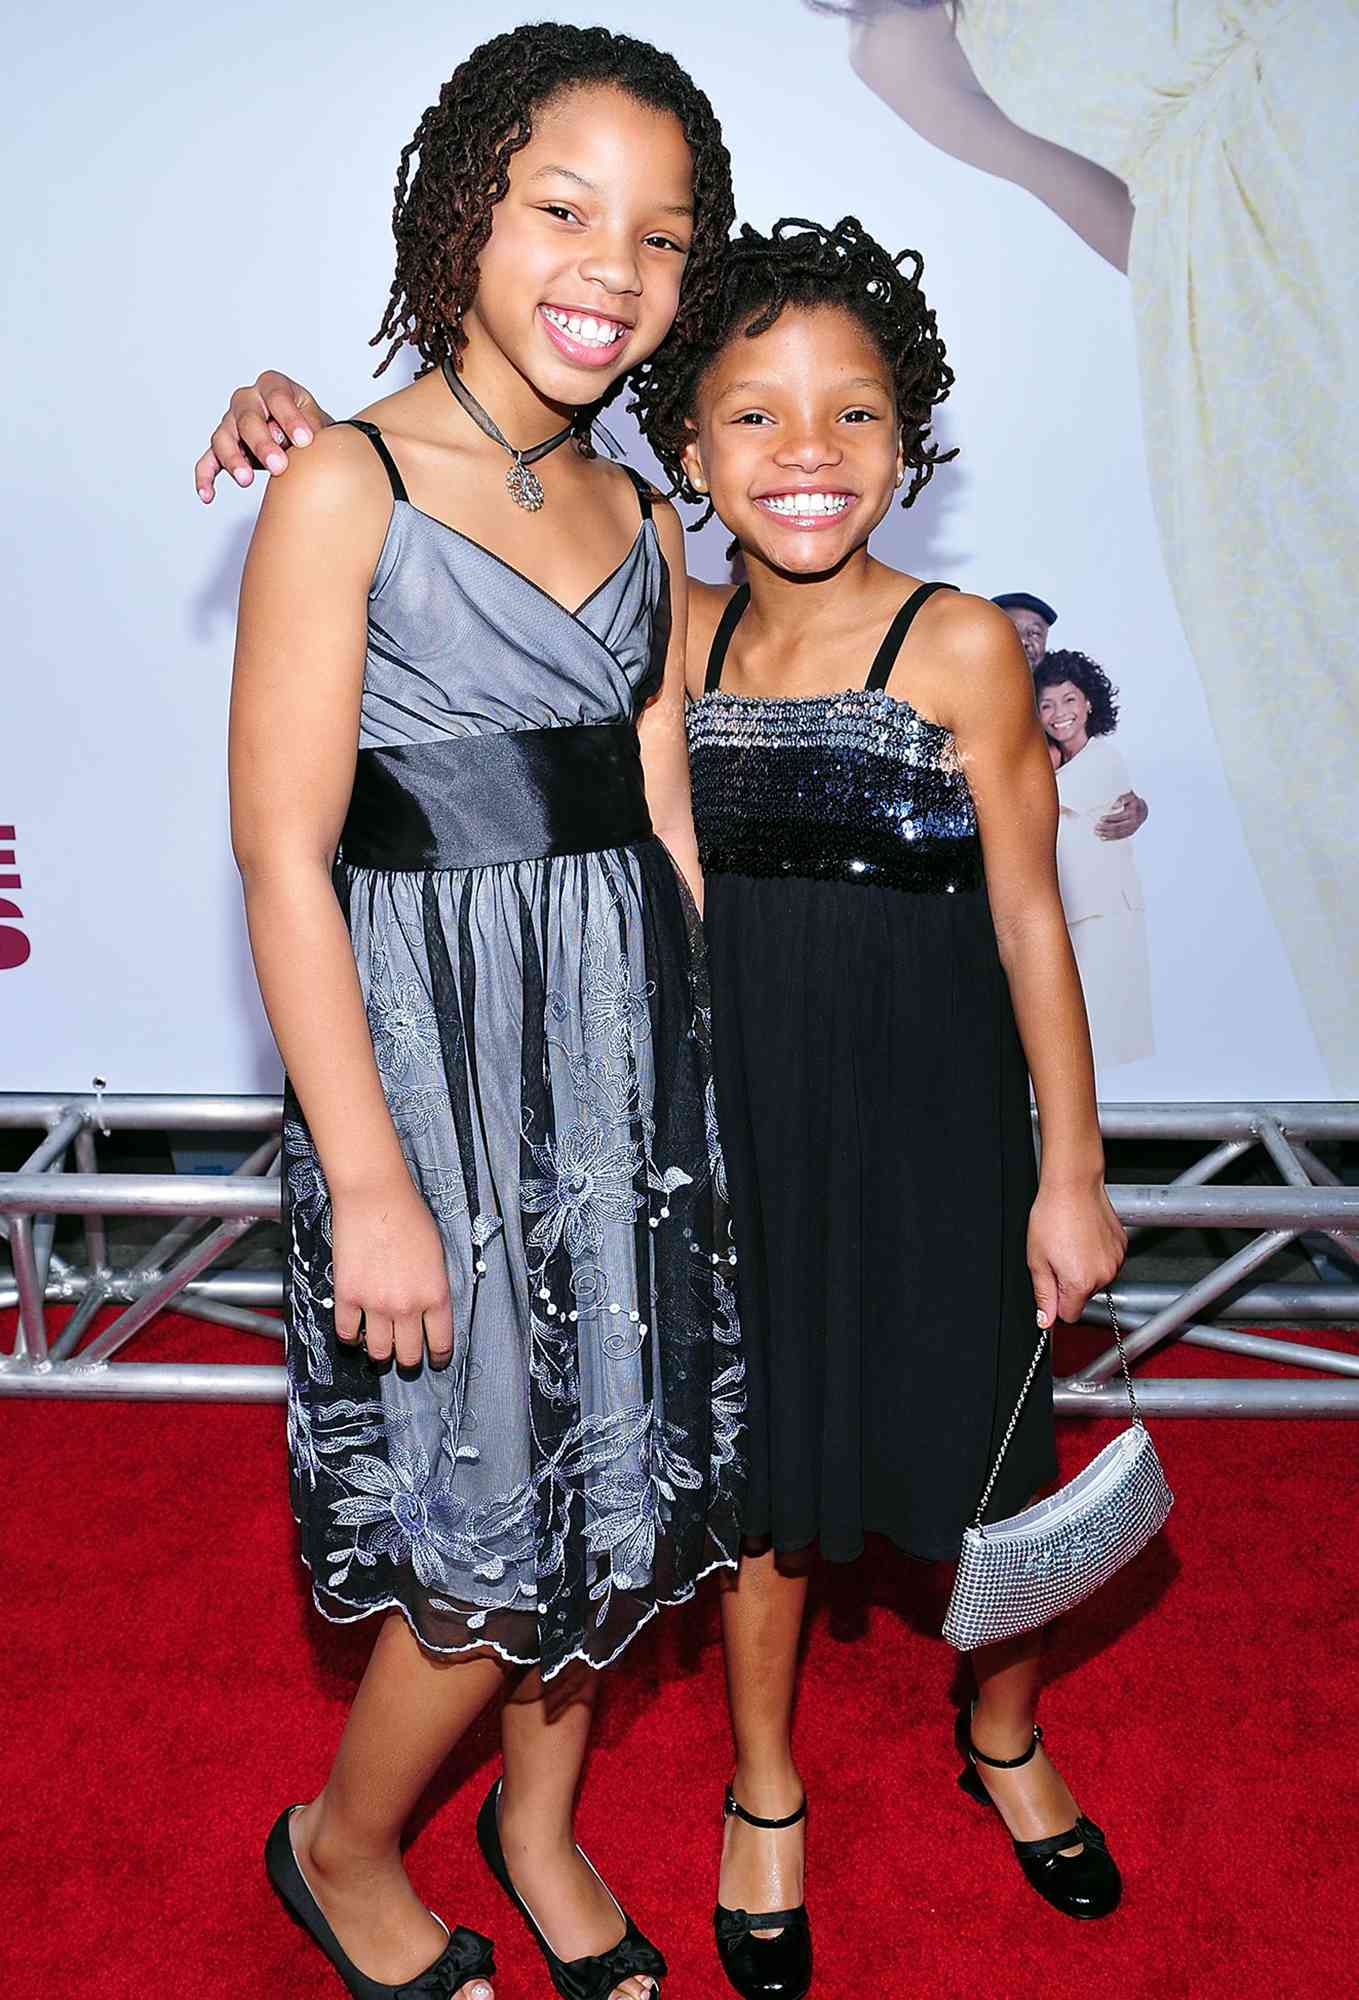 Halle Bailey and Chloe Bailey in their childhood at a show